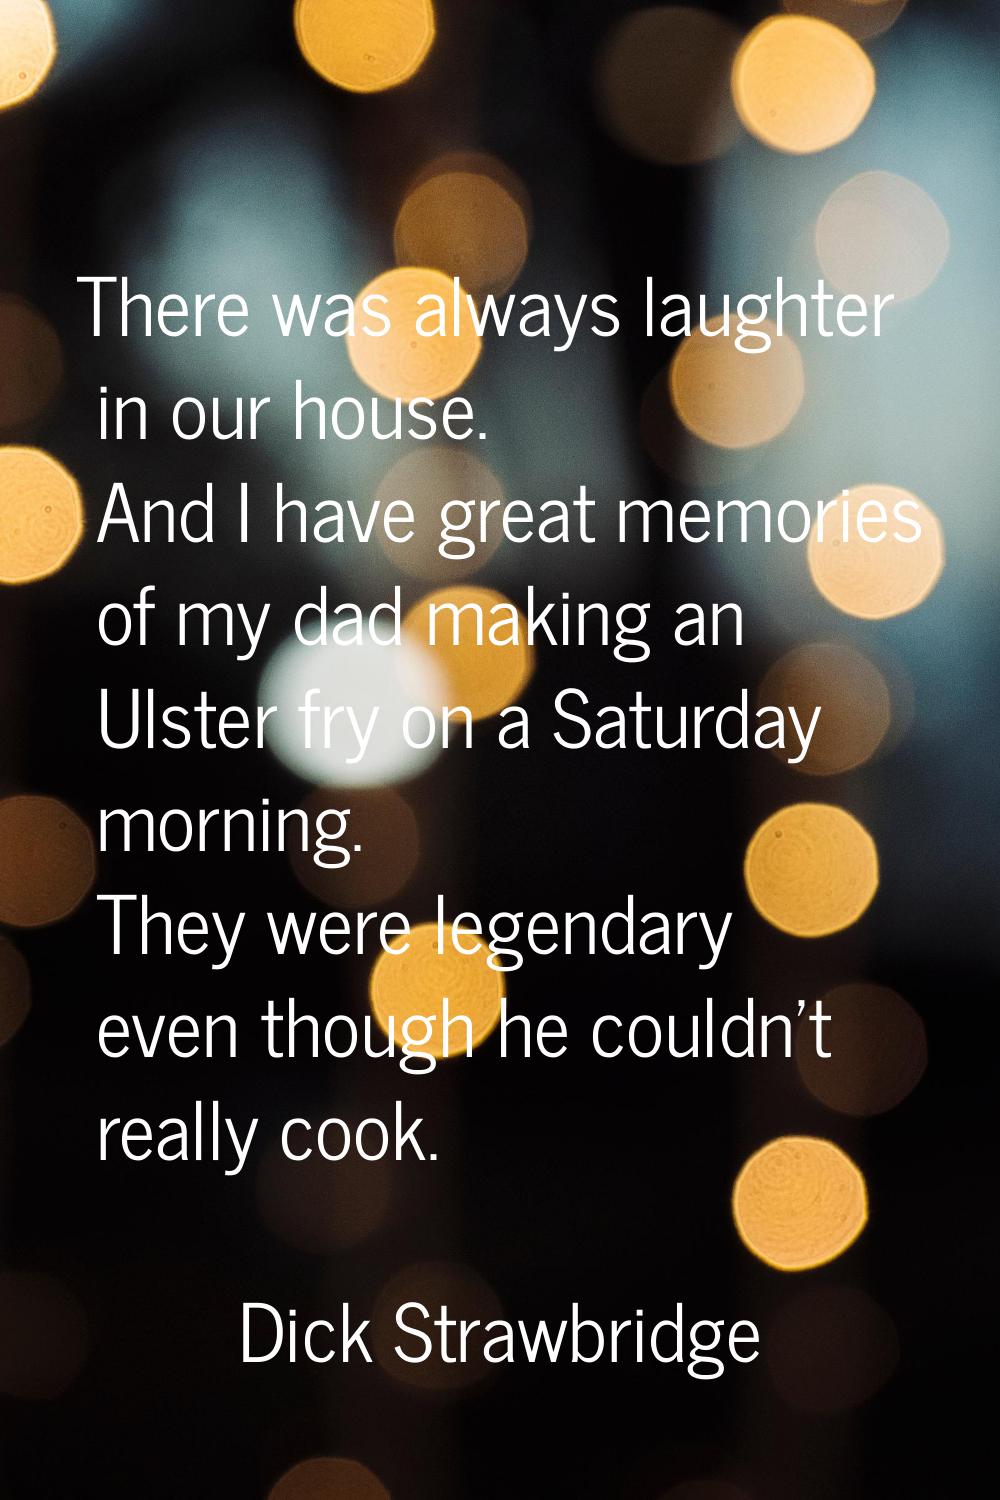 There was always laughter in our house. And I have great memories of my dad making an Ulster fry on